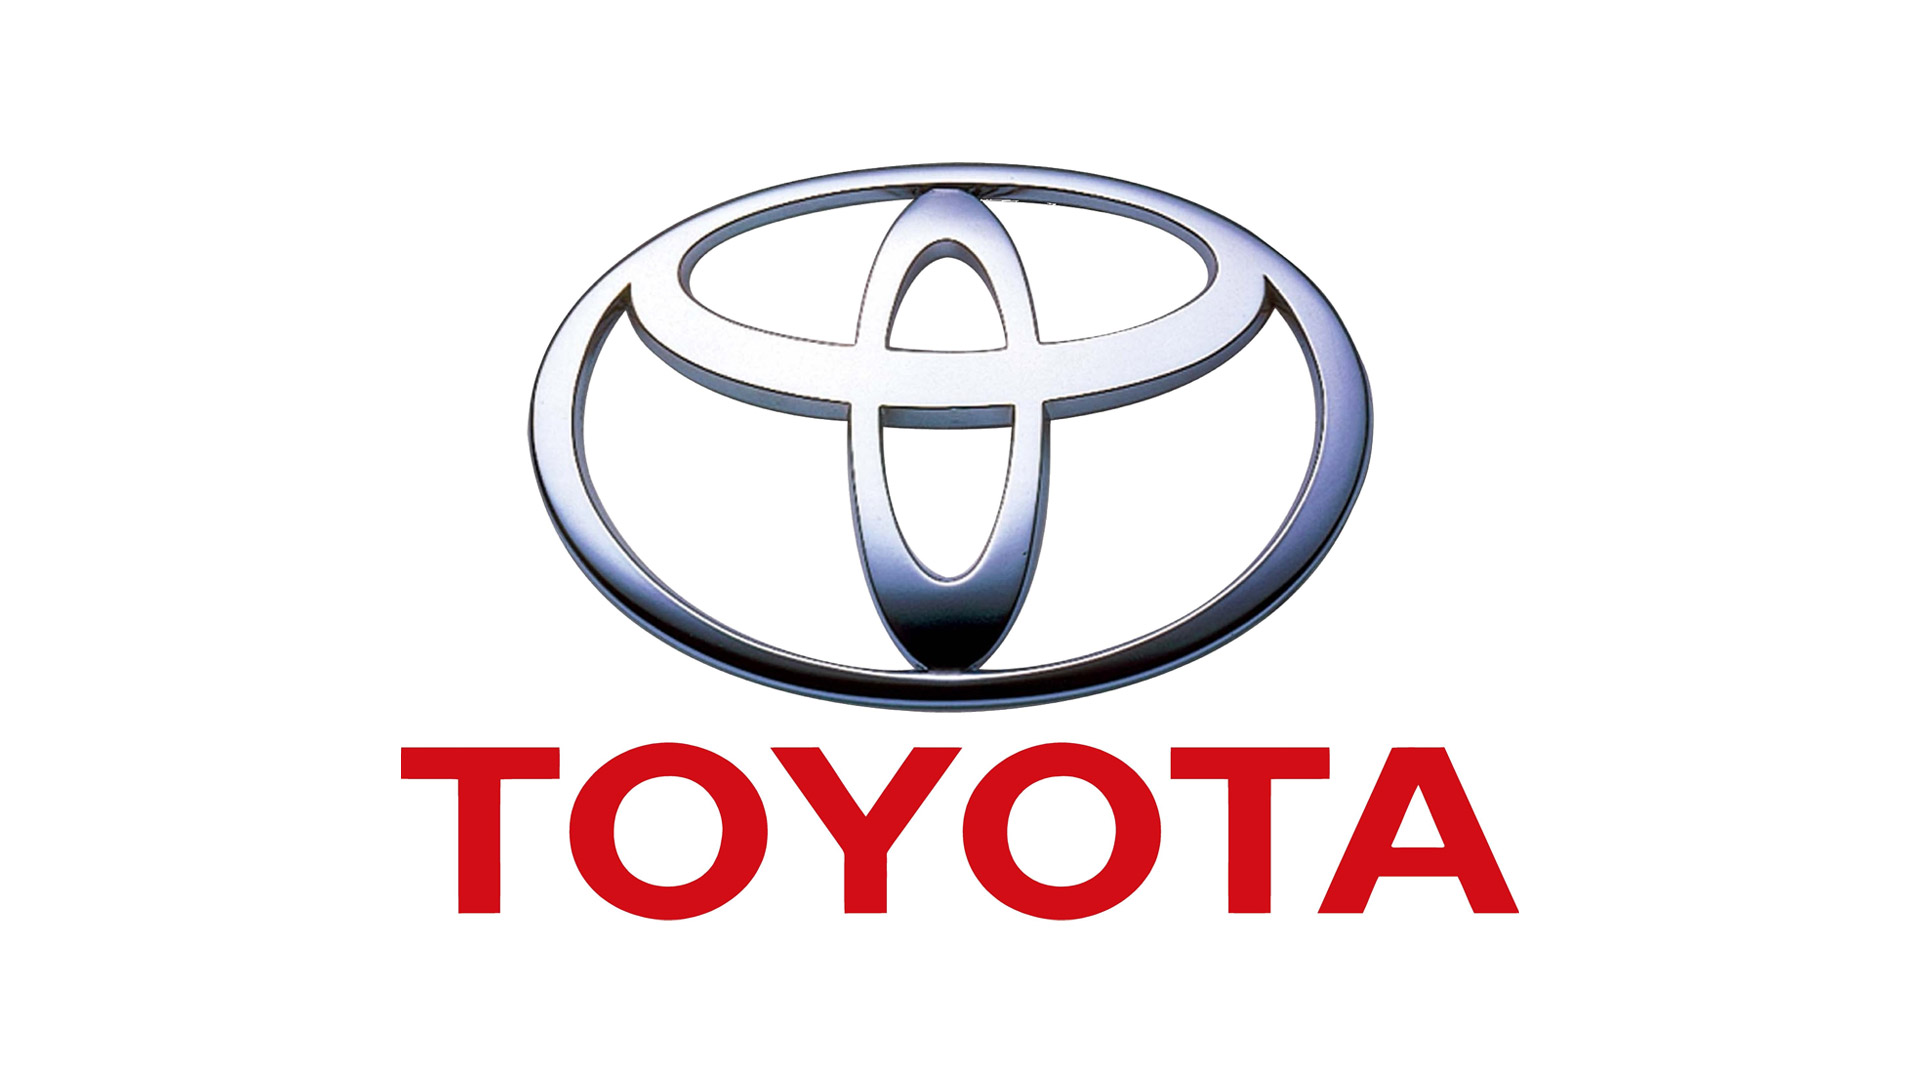 Toyota Marketing And Sales Inc.